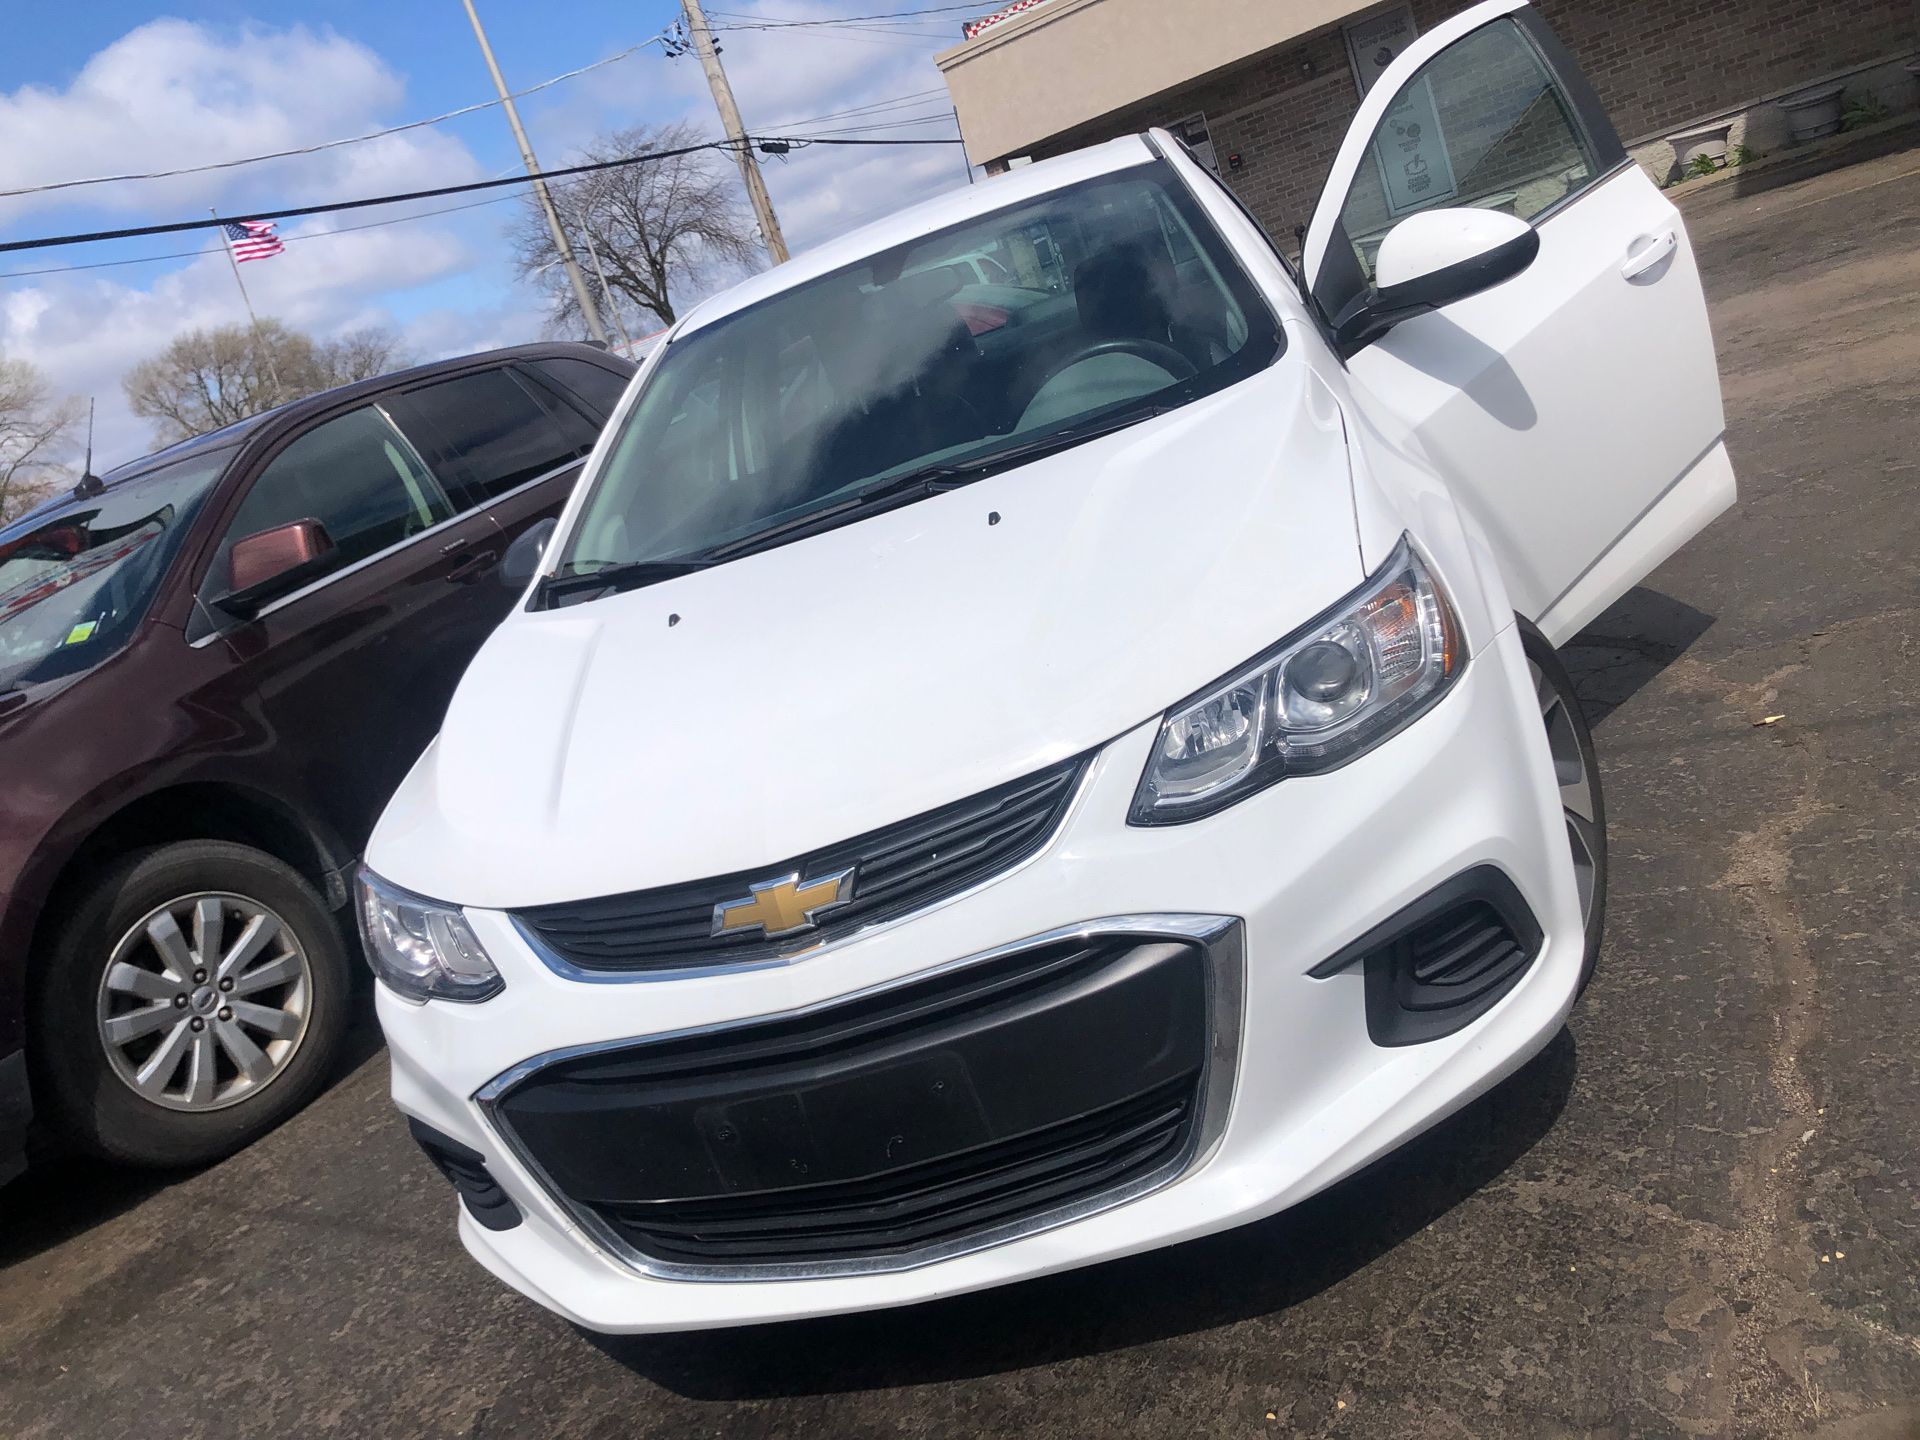 2019 Chevy sonic Clean title Low miles come pick up today Auction price